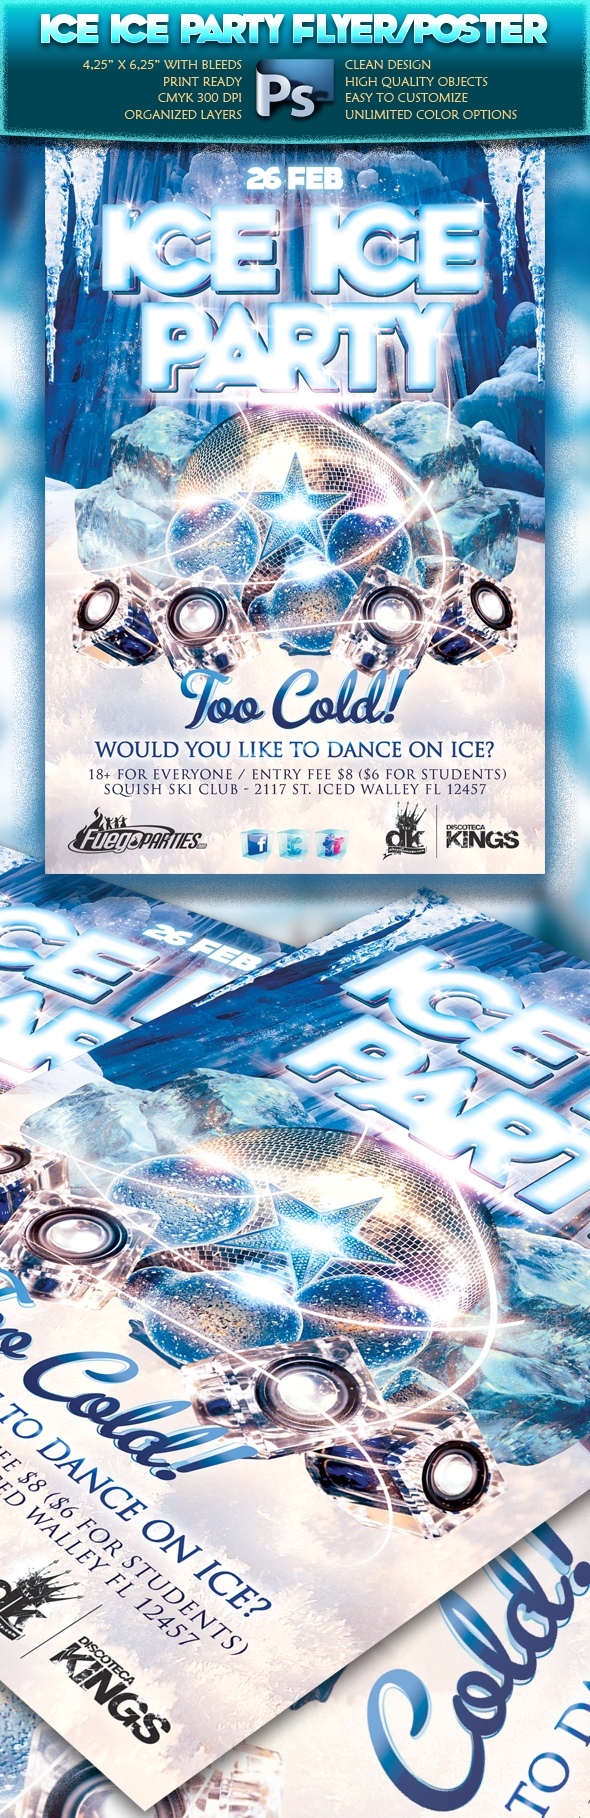 Ice Ice Party Flyer